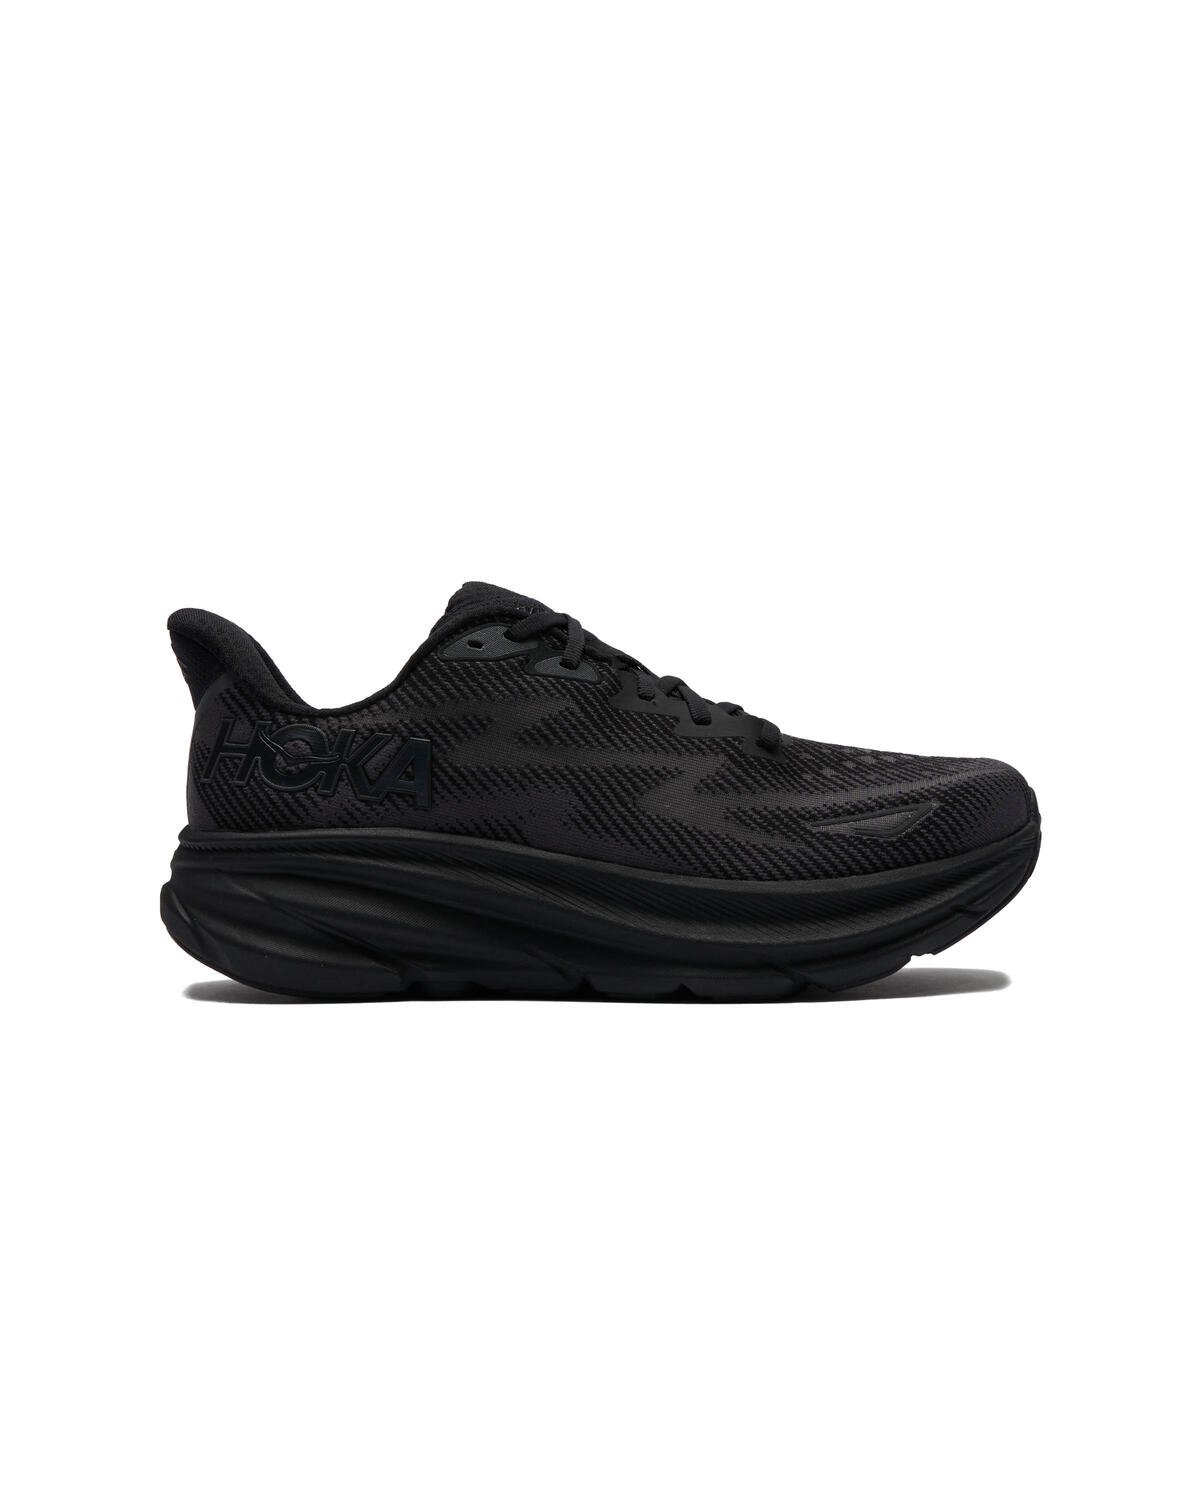 Hoka One One CLIFTON 9 | 1127895-BBLC | AFEW STORE